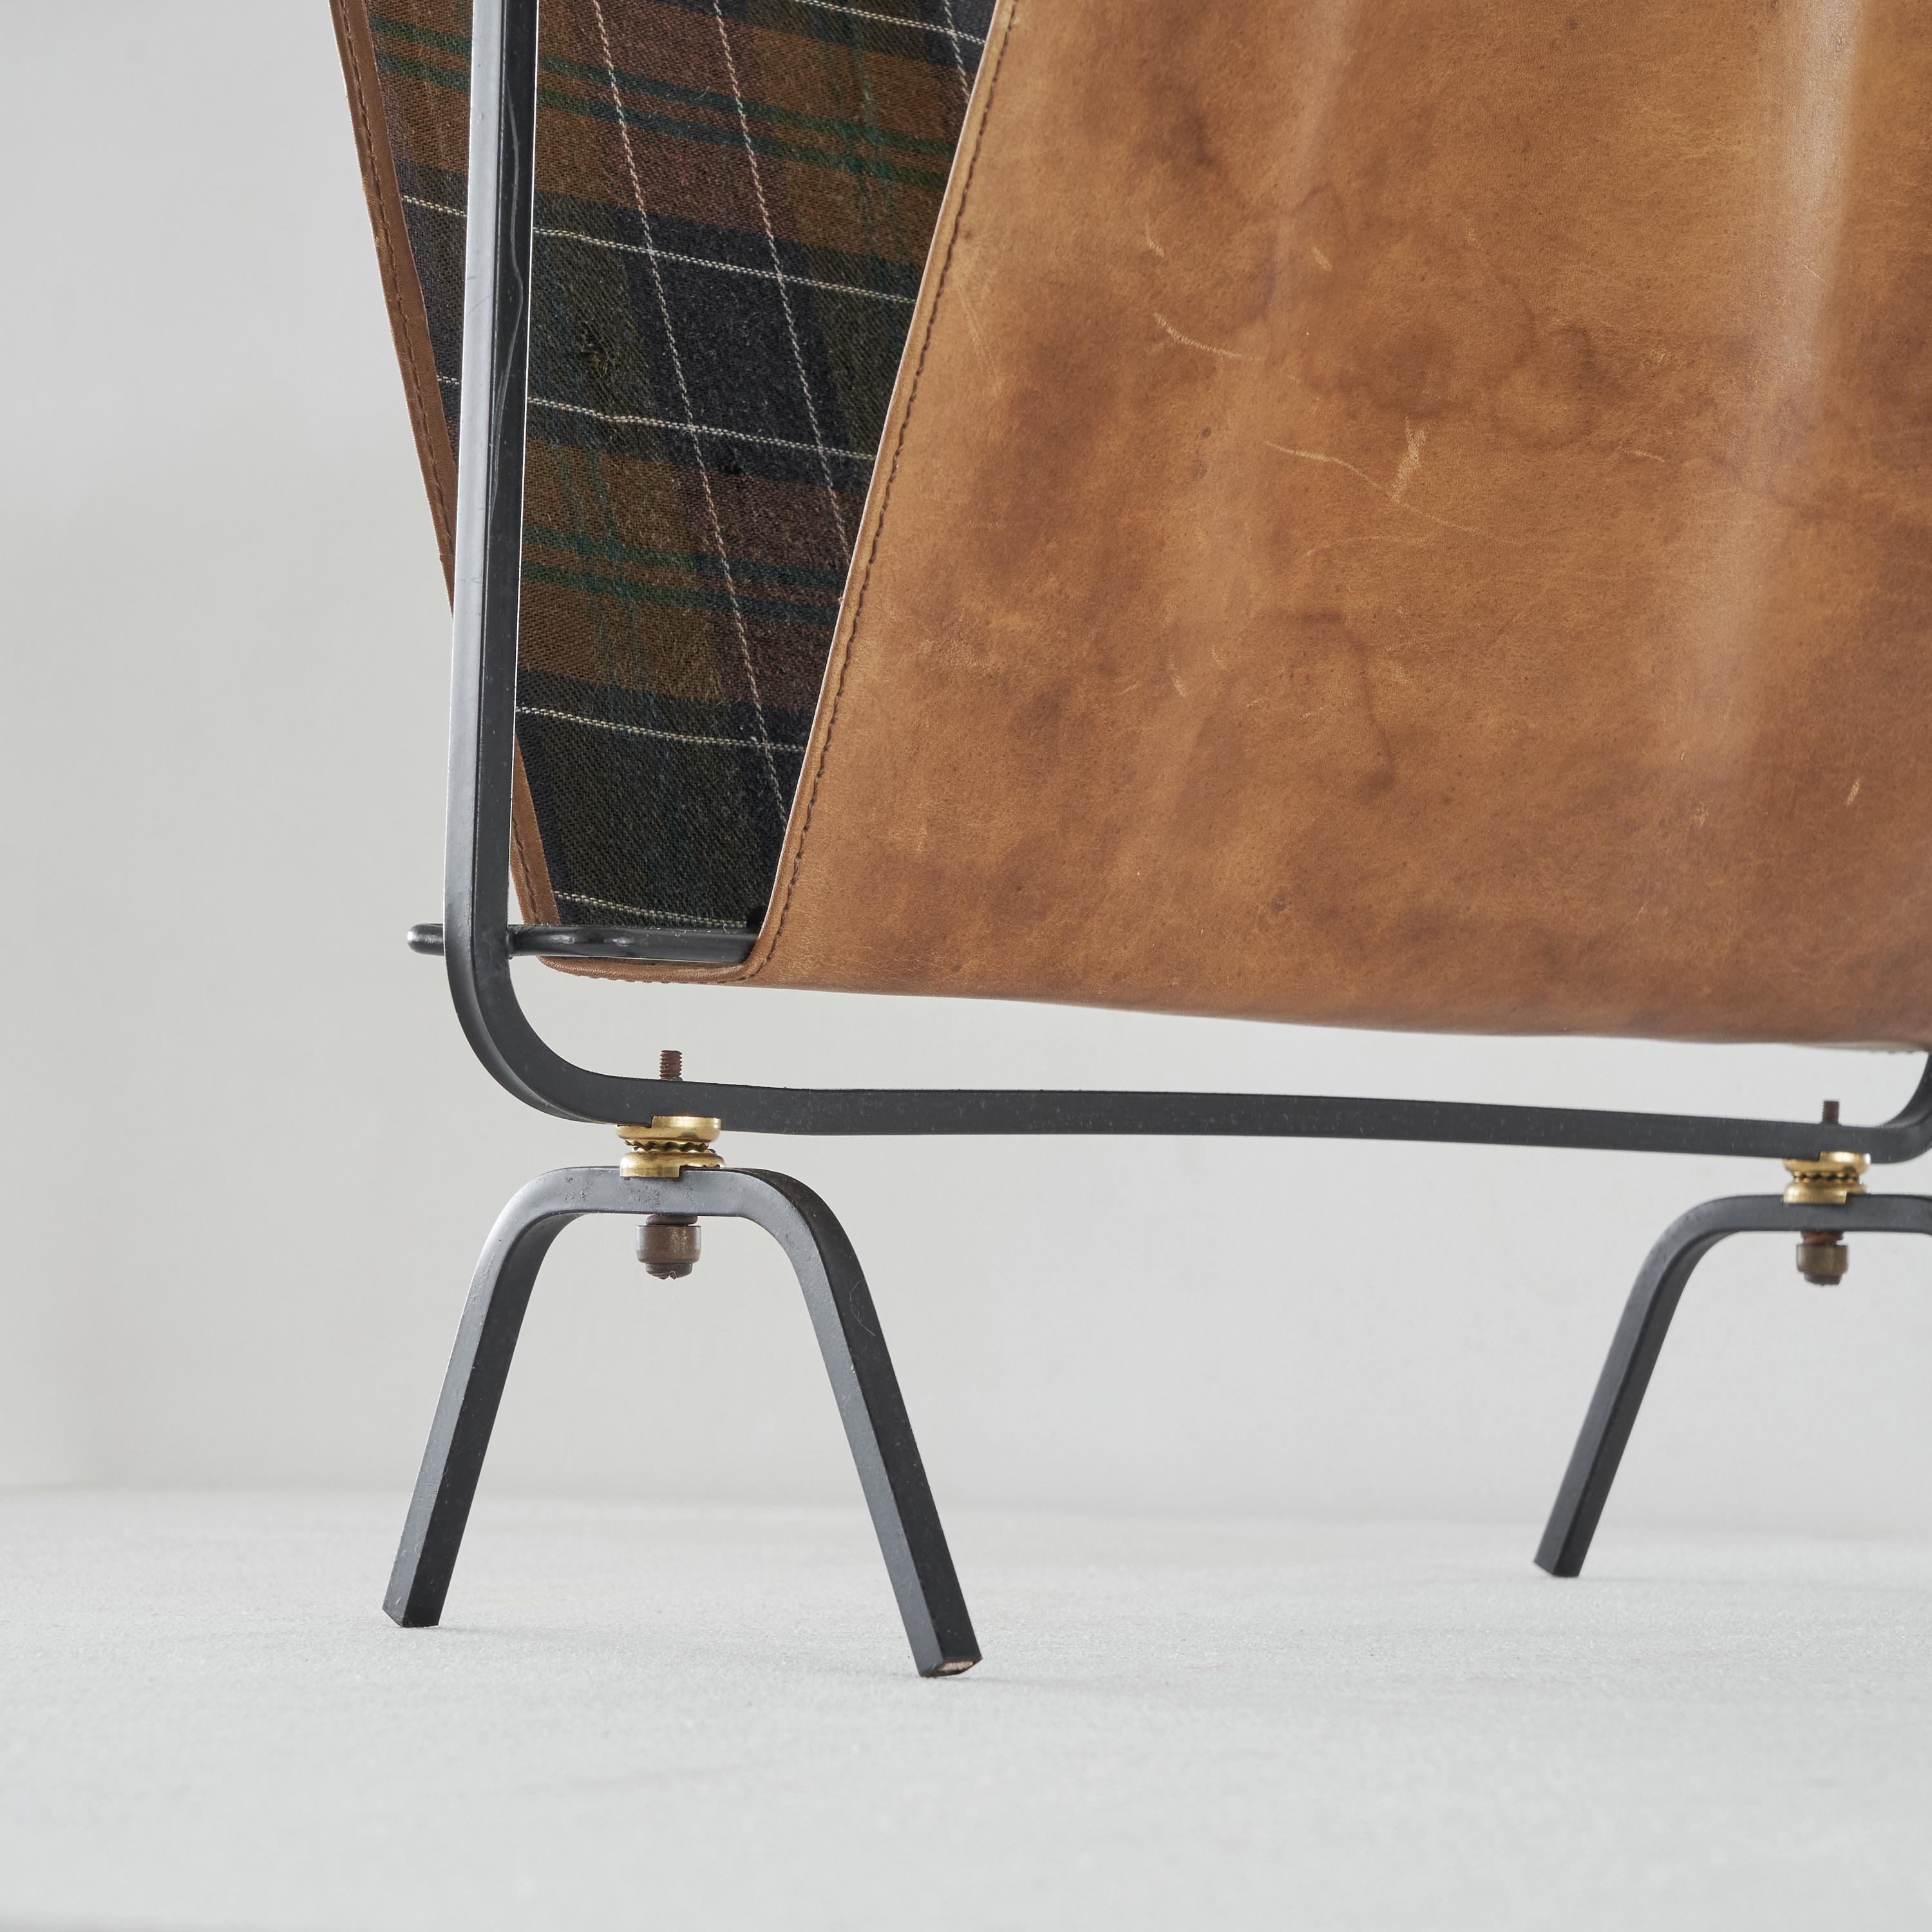 European Mid-Century Magazine Rack in Patinated Cognac Leather, Brass and Metal, 1950s For Sale